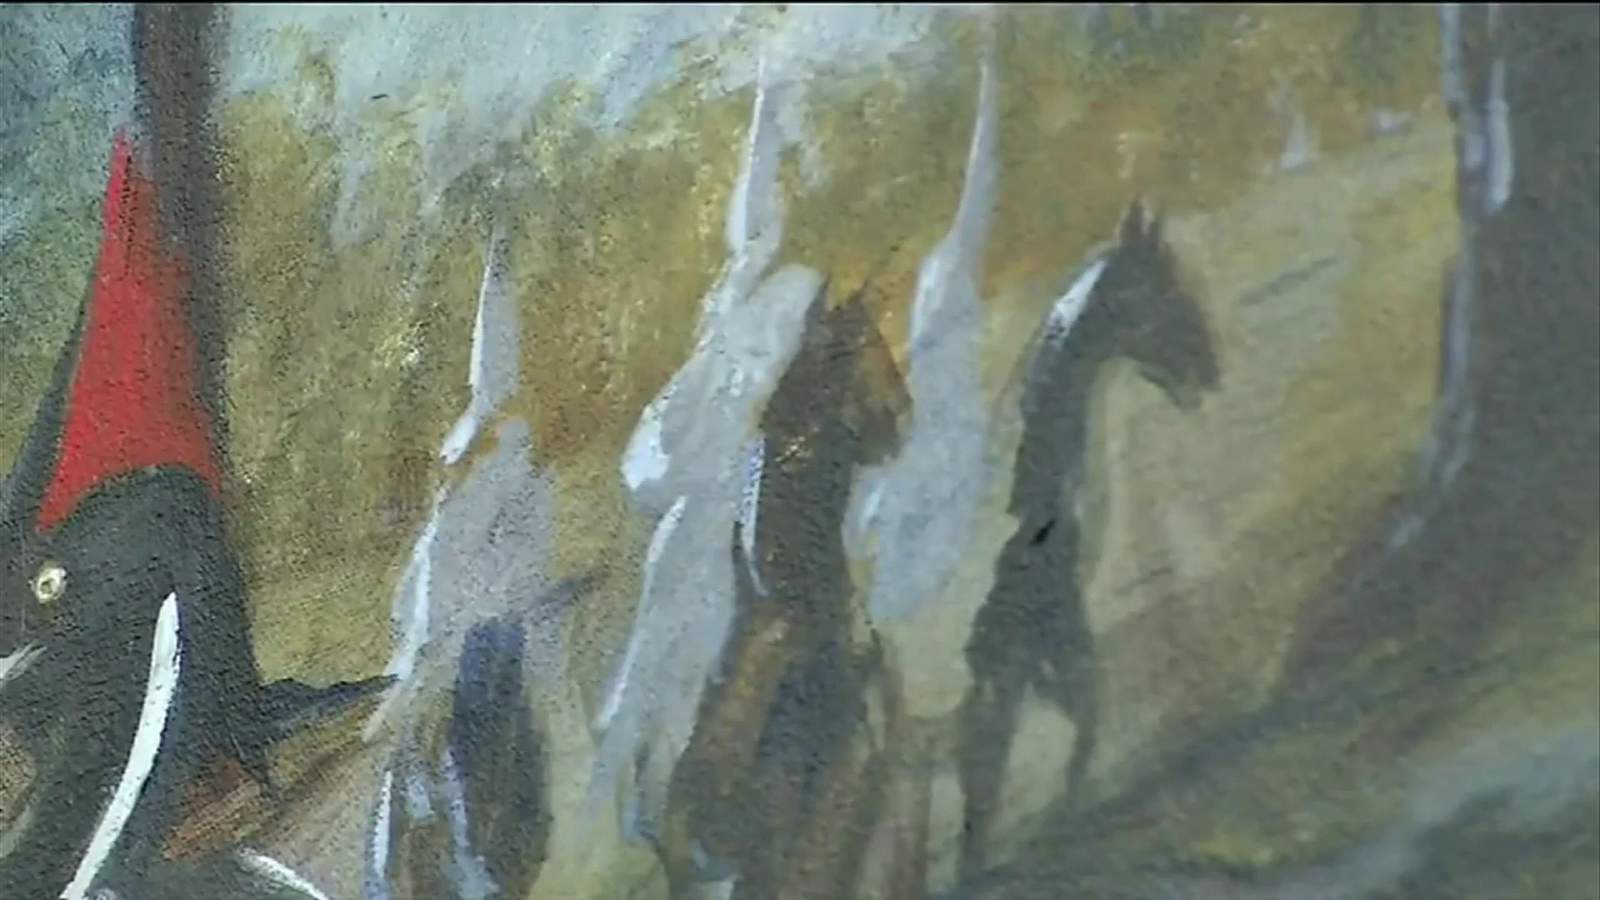 The mural inside the lobby of the Baker County Courthouse includes this image of Ku Klux Klan members. (News4Jax.com)